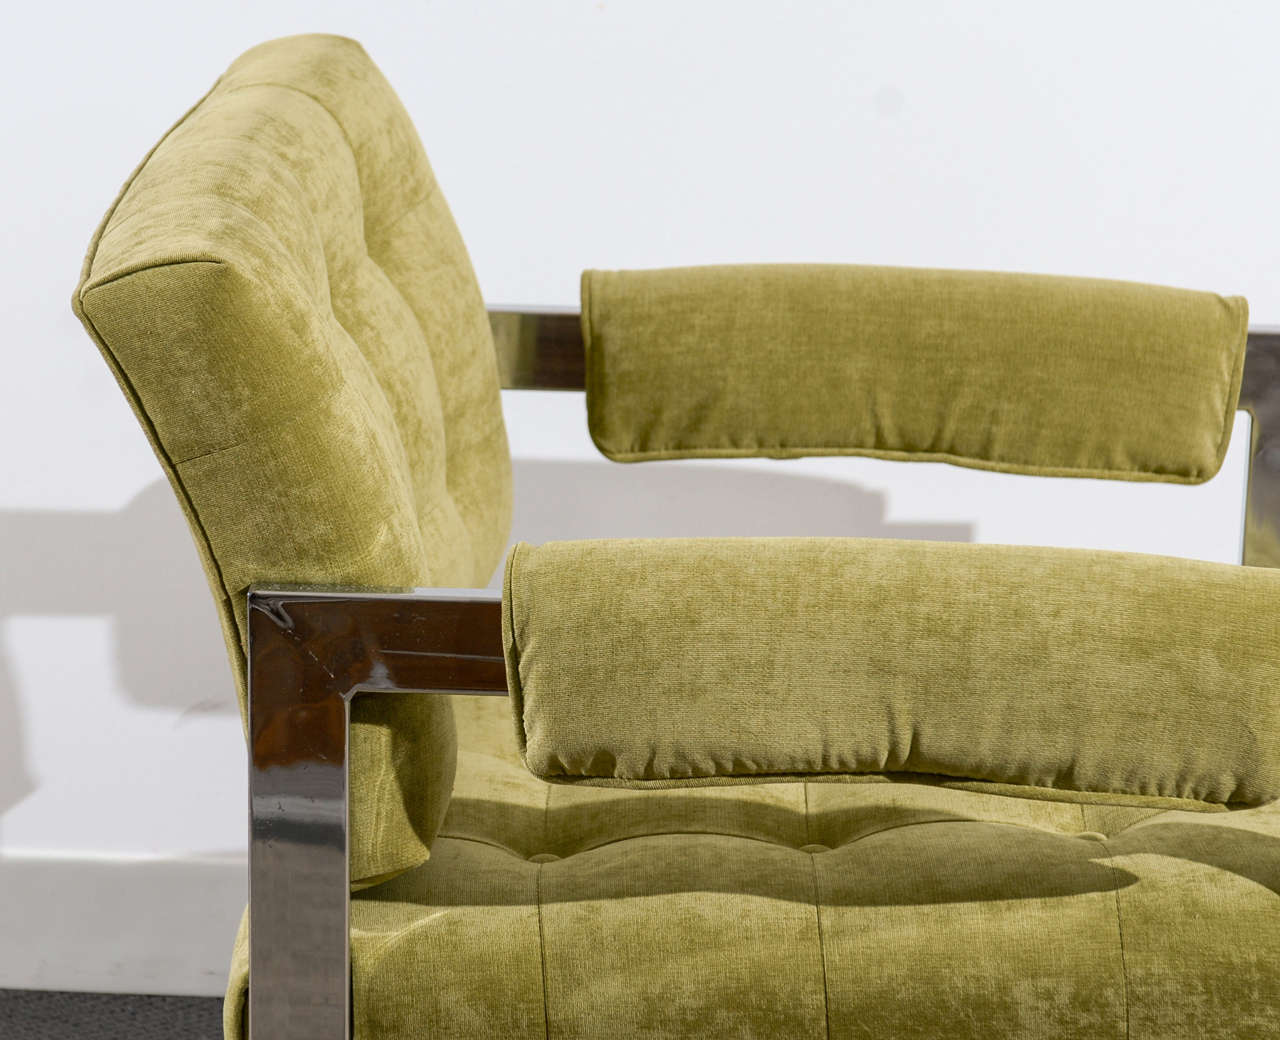 Stylish Pair of Milo Baughman Style Lounge Chairs in Lime Chenille, circa 1975 For Sale 1